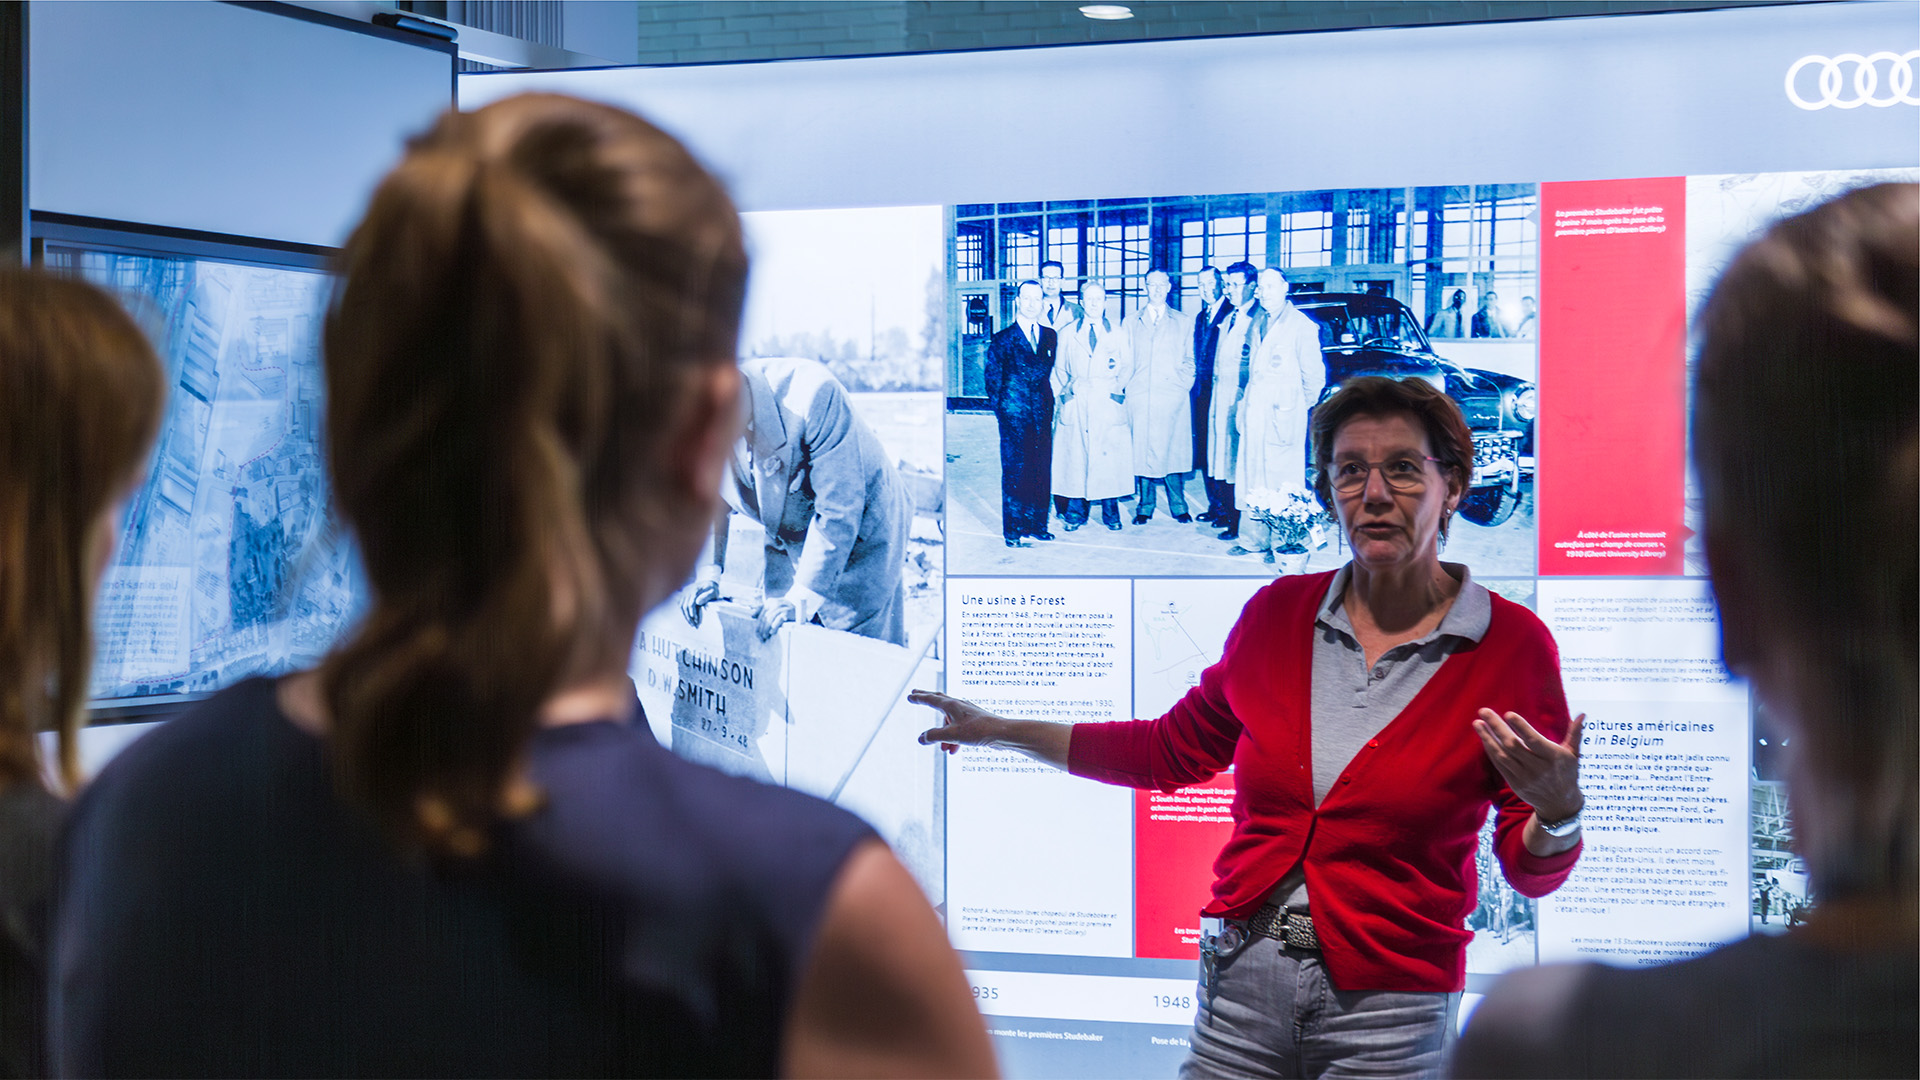 A woman explaining the history of Audi Brussels